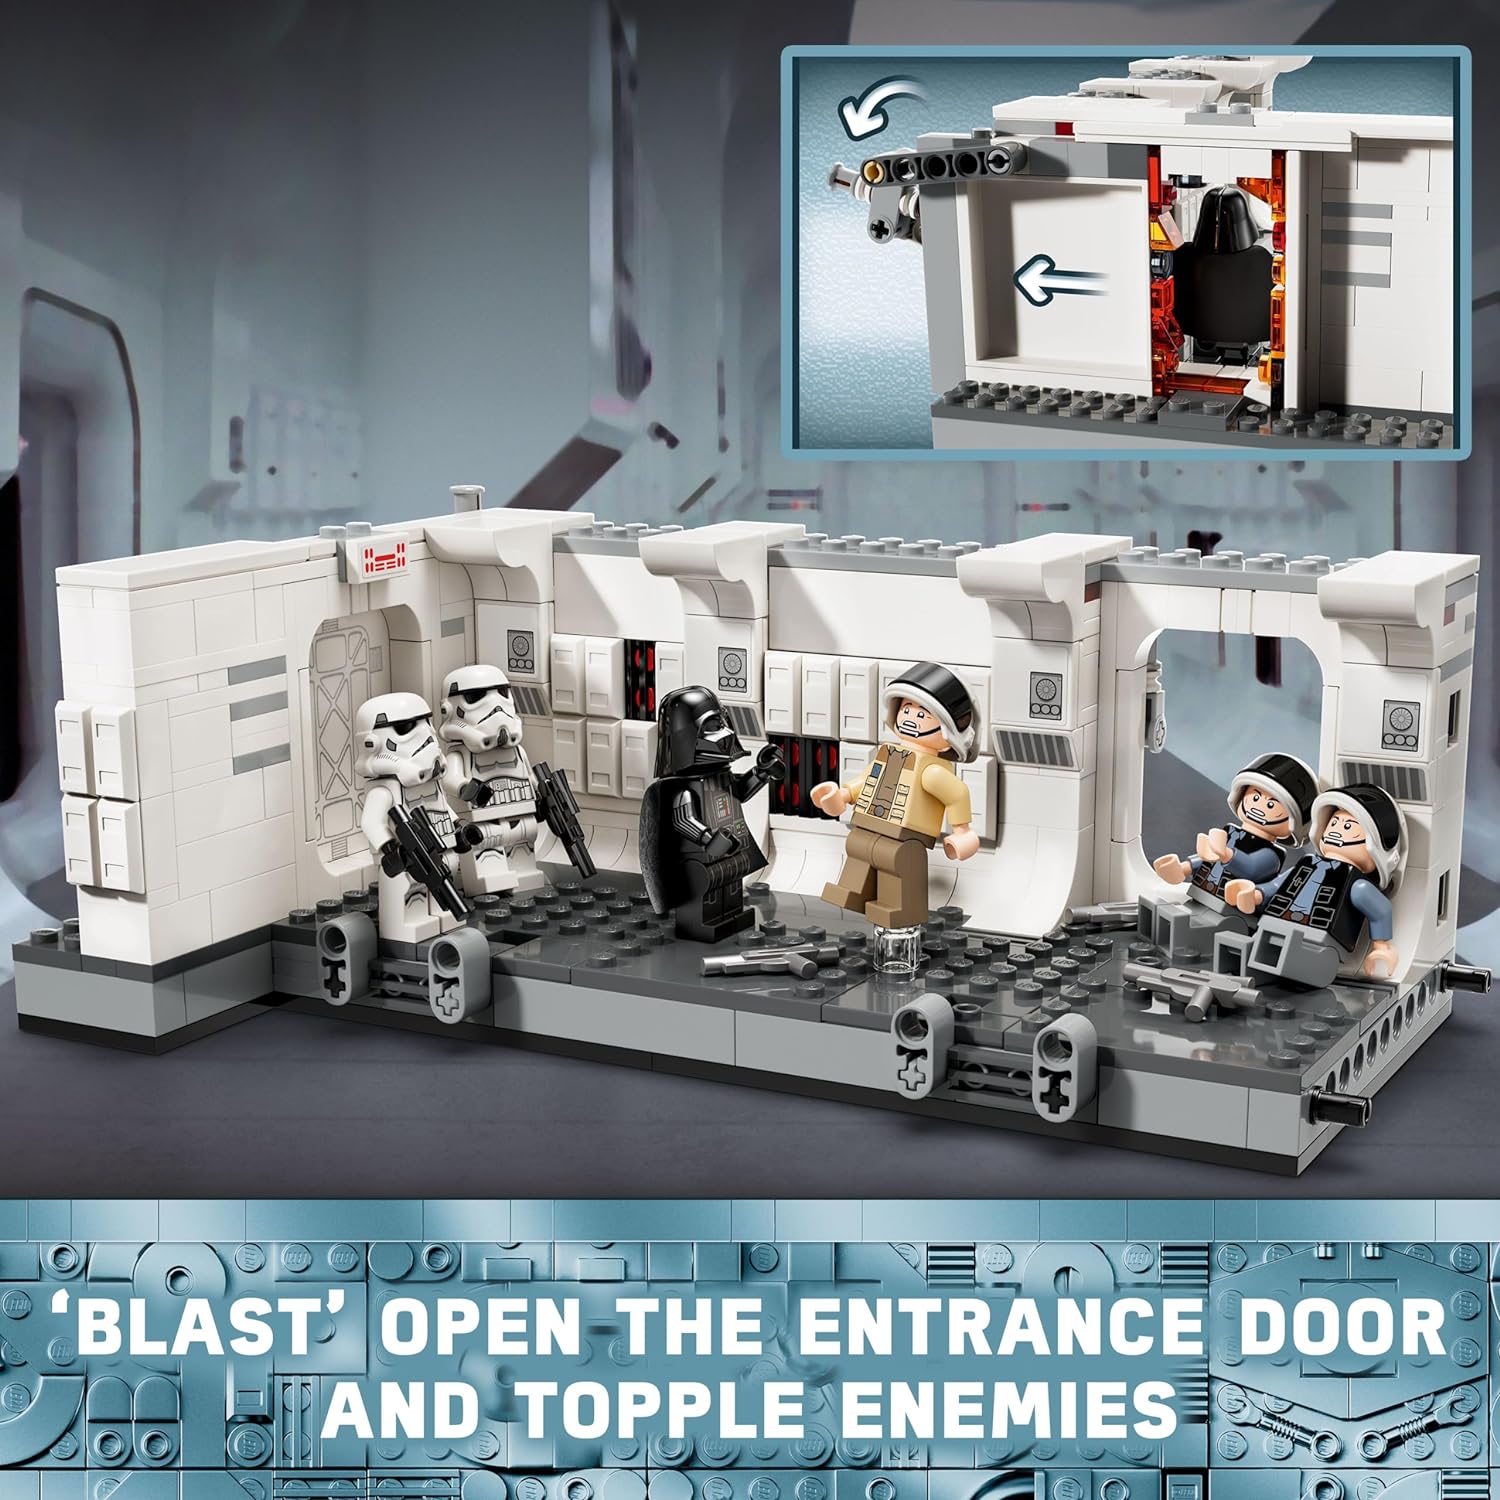 LEGO 75387 Star Wars: A New Hope Boarding The Tantive IV Fantasy Toy, Collectible Star Wars Toy with Exclusive 25th Anniversary Minifigure Clone Trooper Fives.